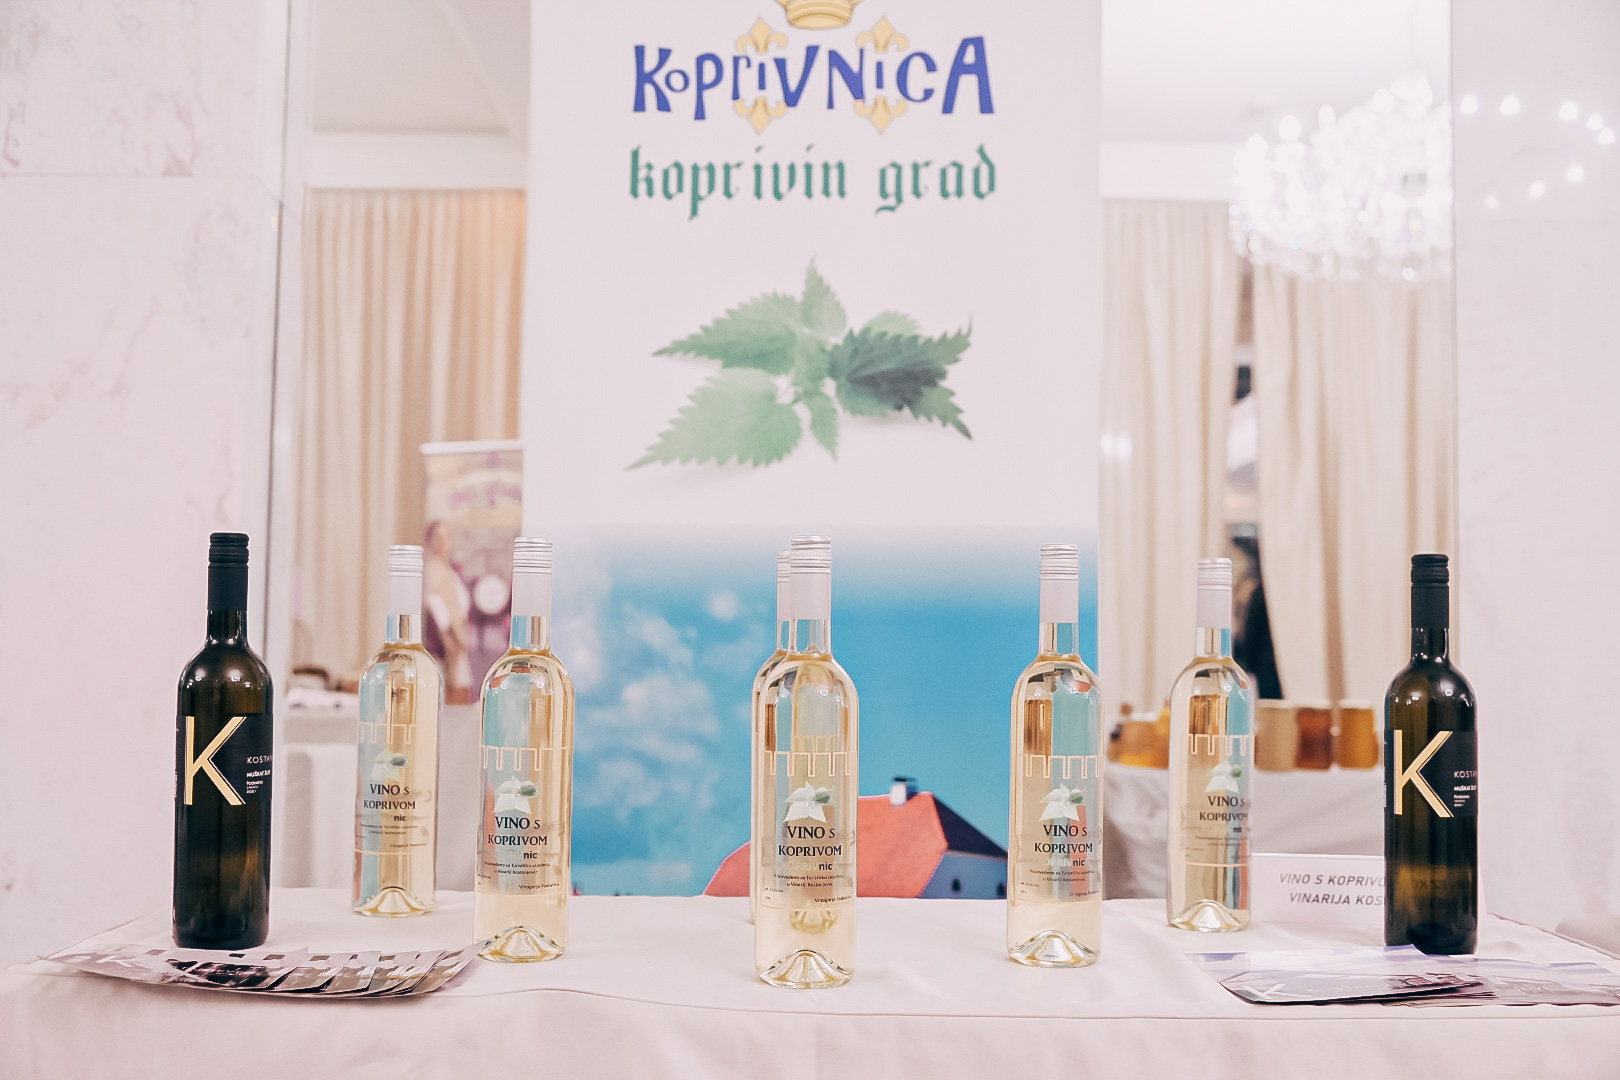 Rural tourism excellence awarded in Opatija 